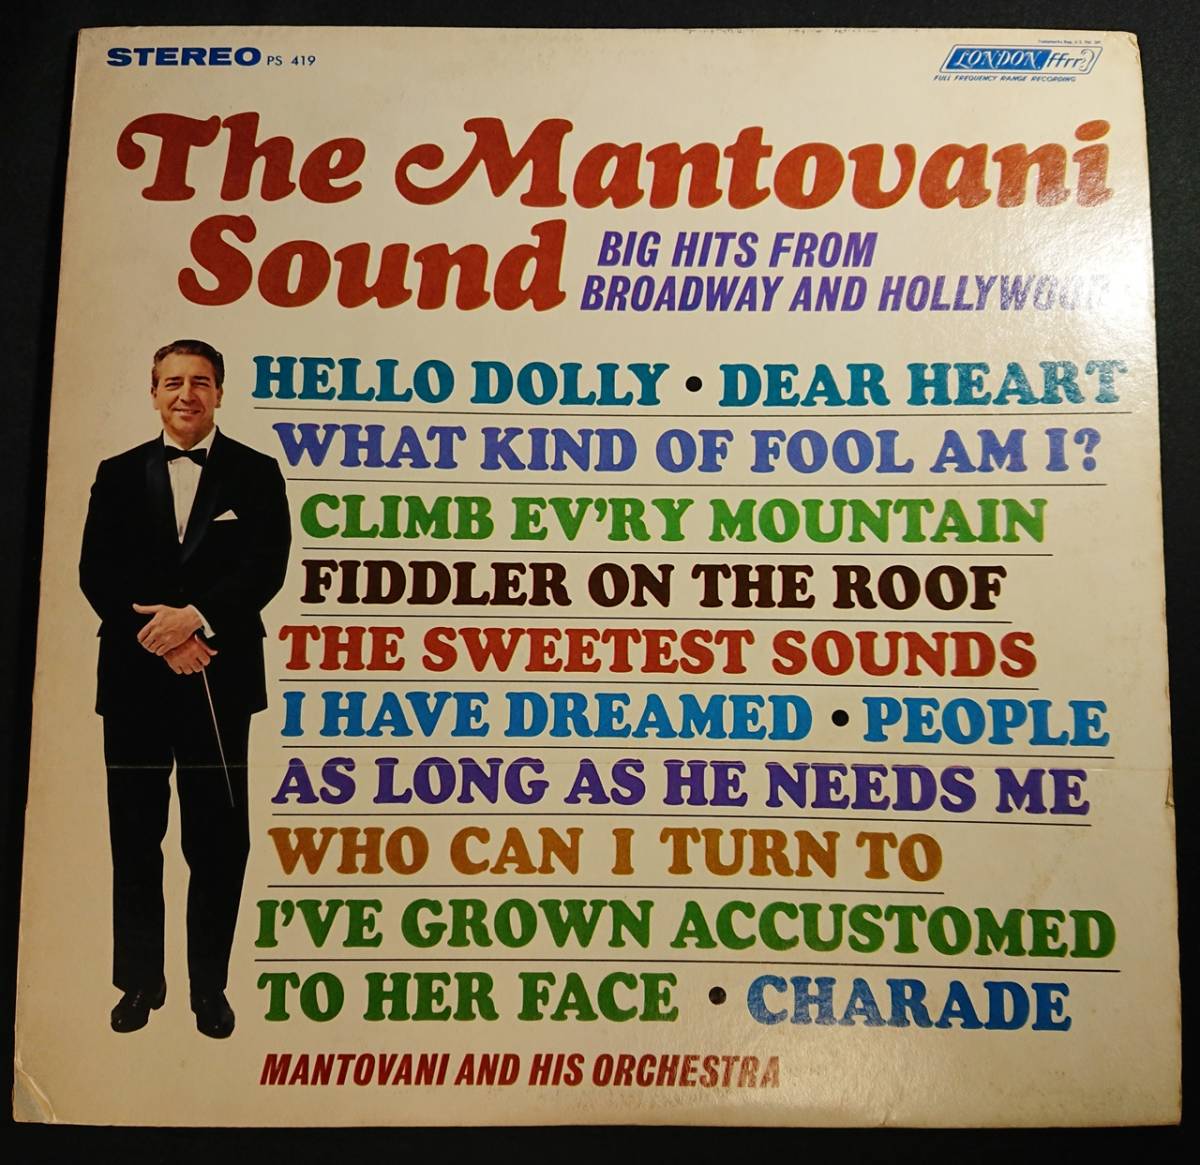 US盤LP 「The Mantovani And His Orchestra - The Mantovani Sound(Big Hits from Broadway & Hollywood)」/マントヴァーニ/PS.419_画像1